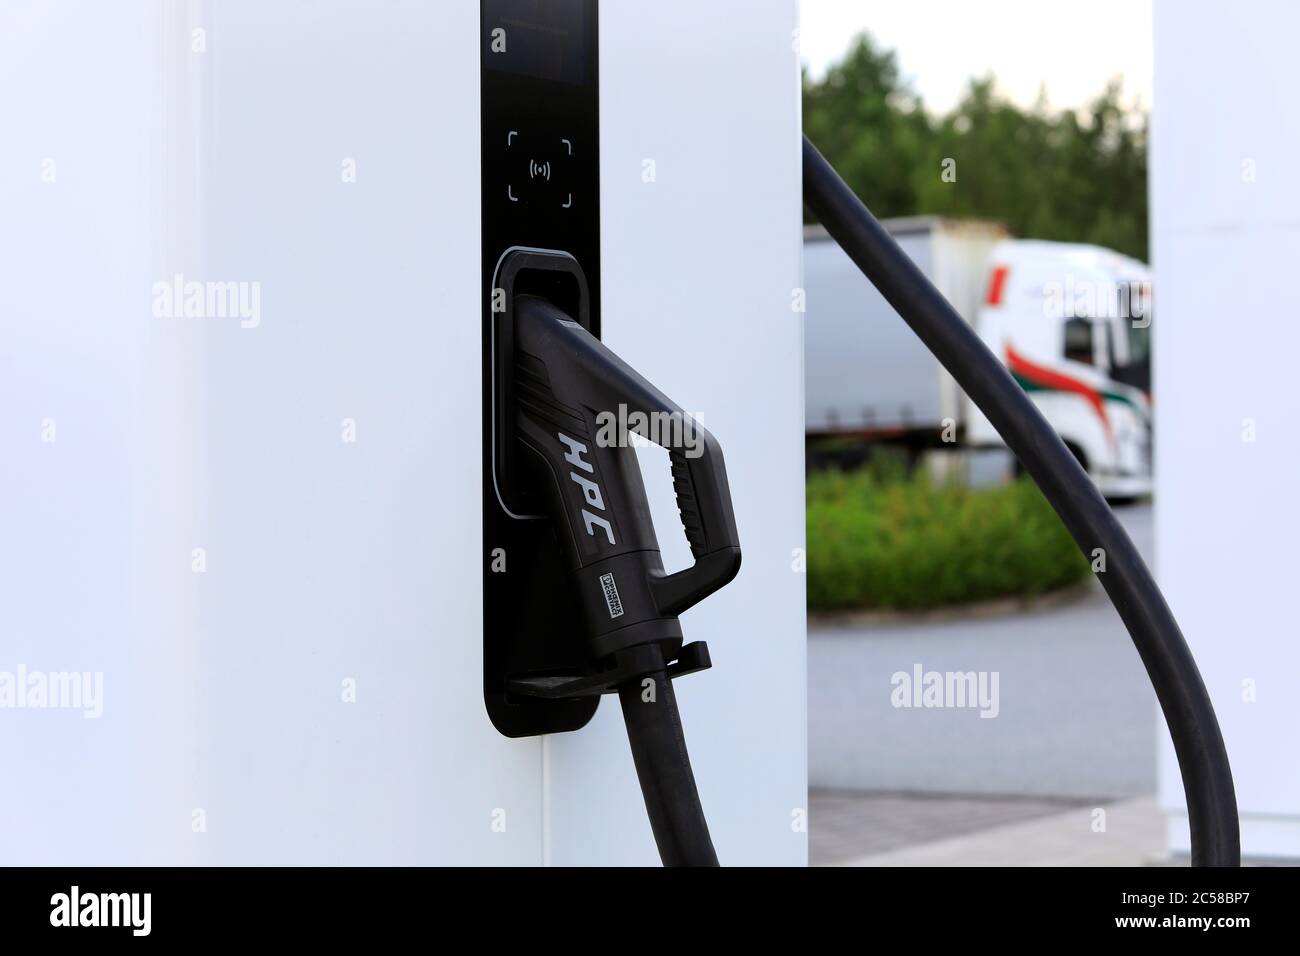 CCS, Combined Charging System plug or connector on IONITY high-power-charging (HPC) unit for electric vehicles.  Paimio, Finland. June 28, 2020. Stock Photo